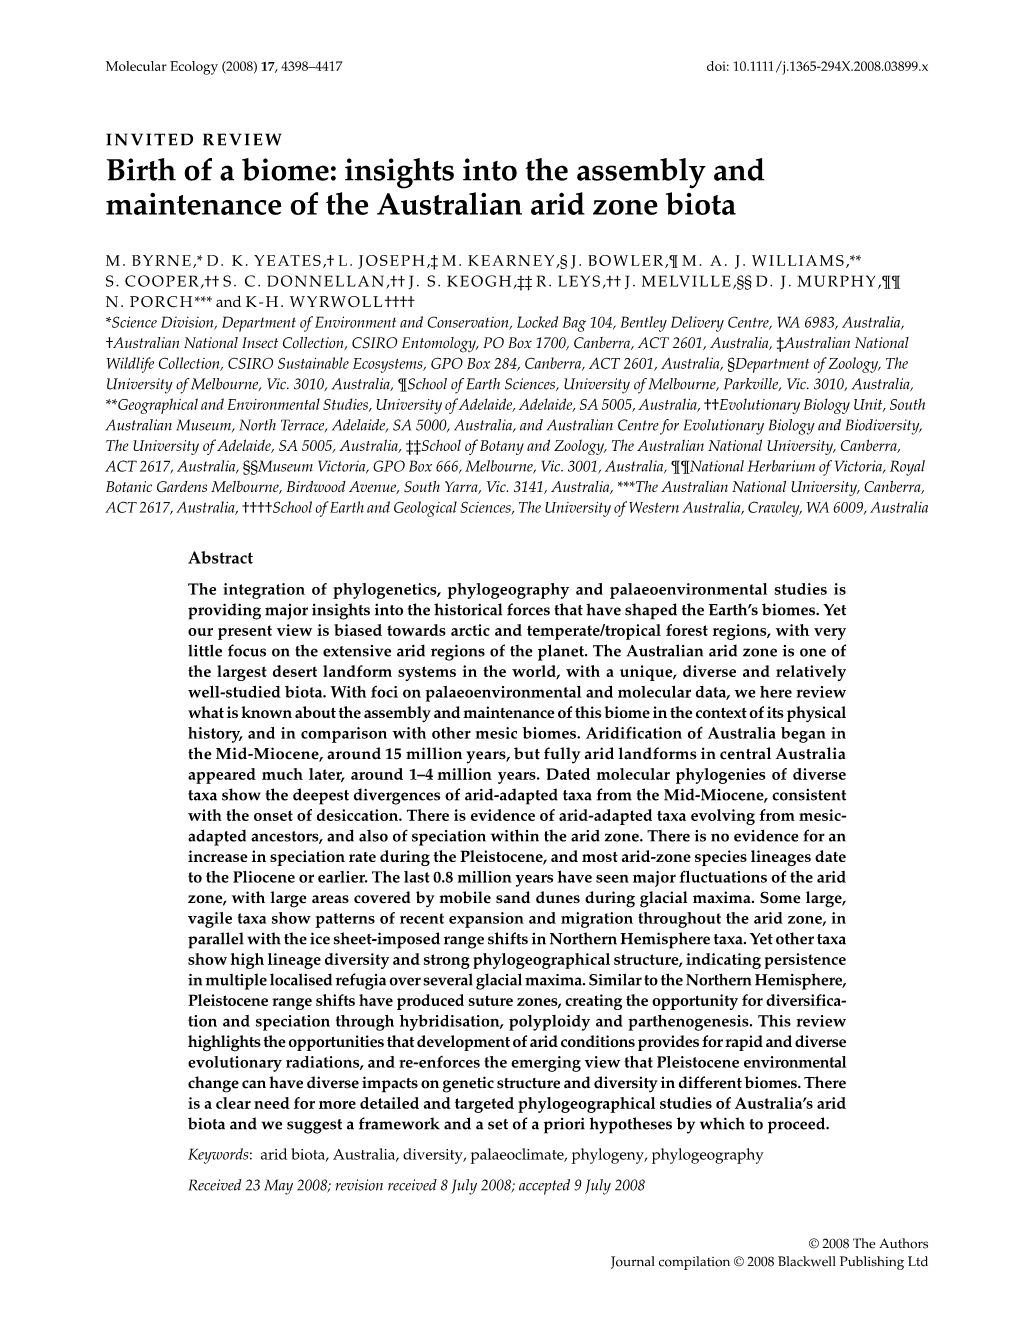 Birth of a Biome: Insights Into the Assembly and Maintenance of the Australian Arid Zone Biota